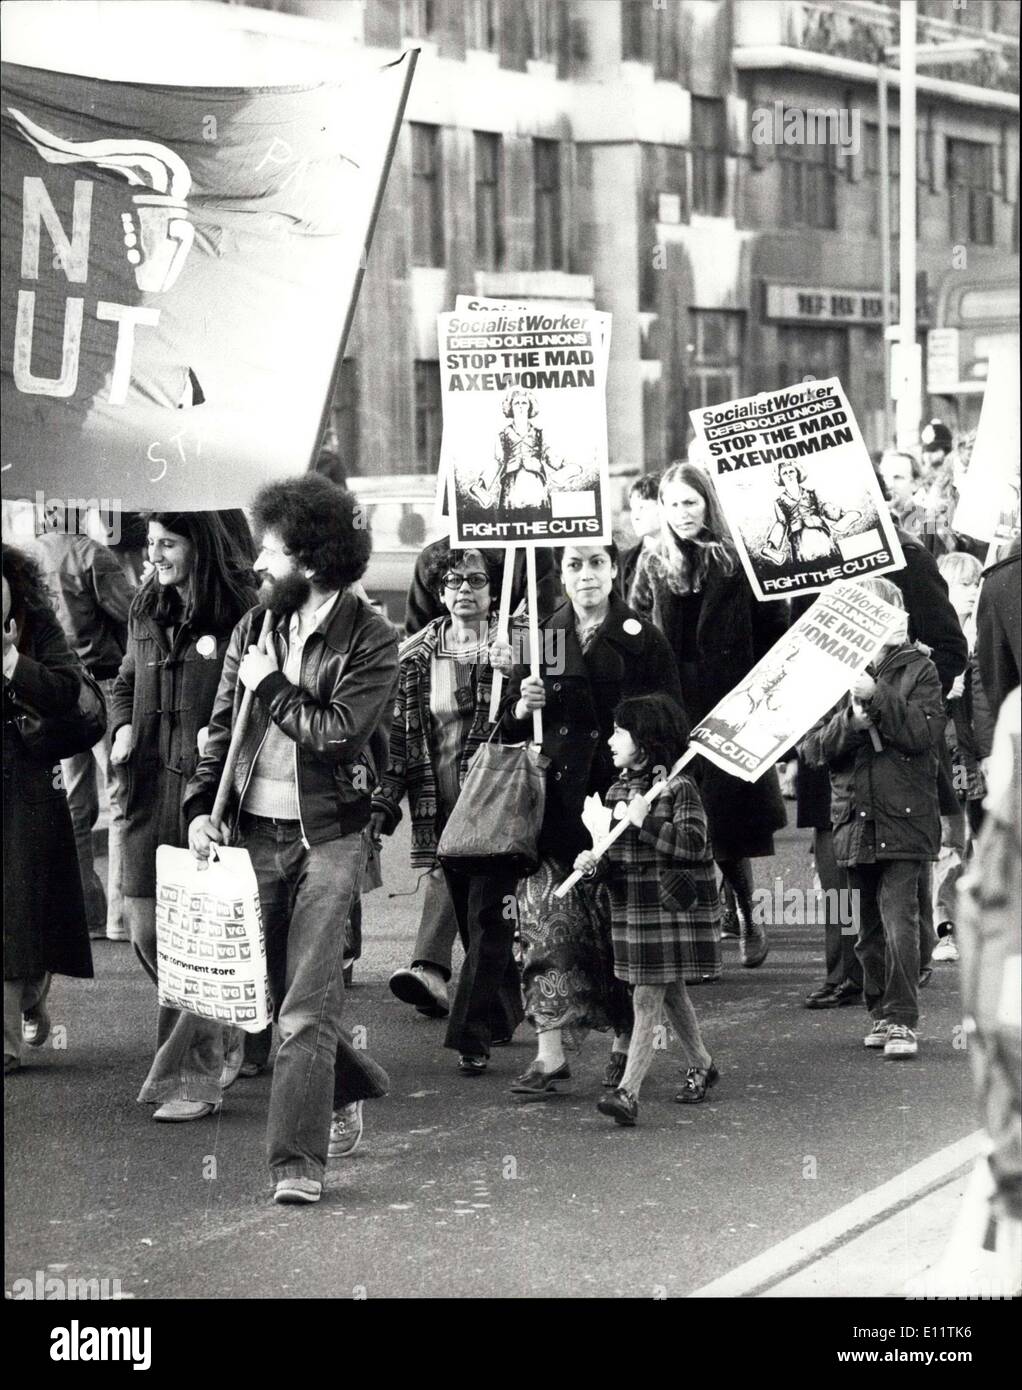 Dec. 04, 1979 - National Union of Teachers March on county Hall: Thousands of Teachers and pupils held a demonstration march in Stock Photo